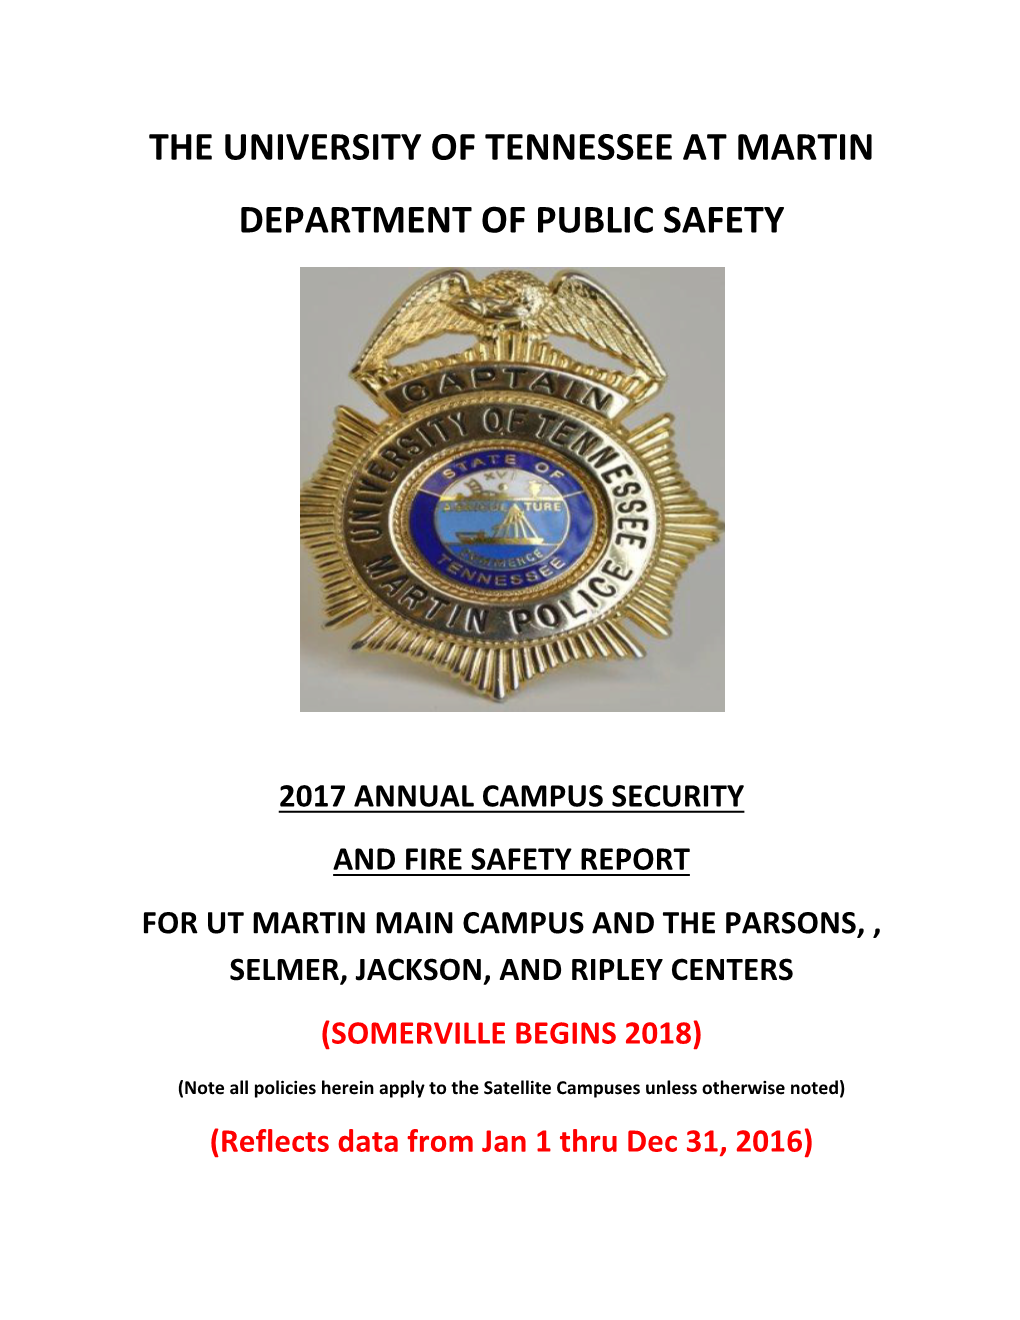 The University of Tennessee at Martin Department of Public Safety